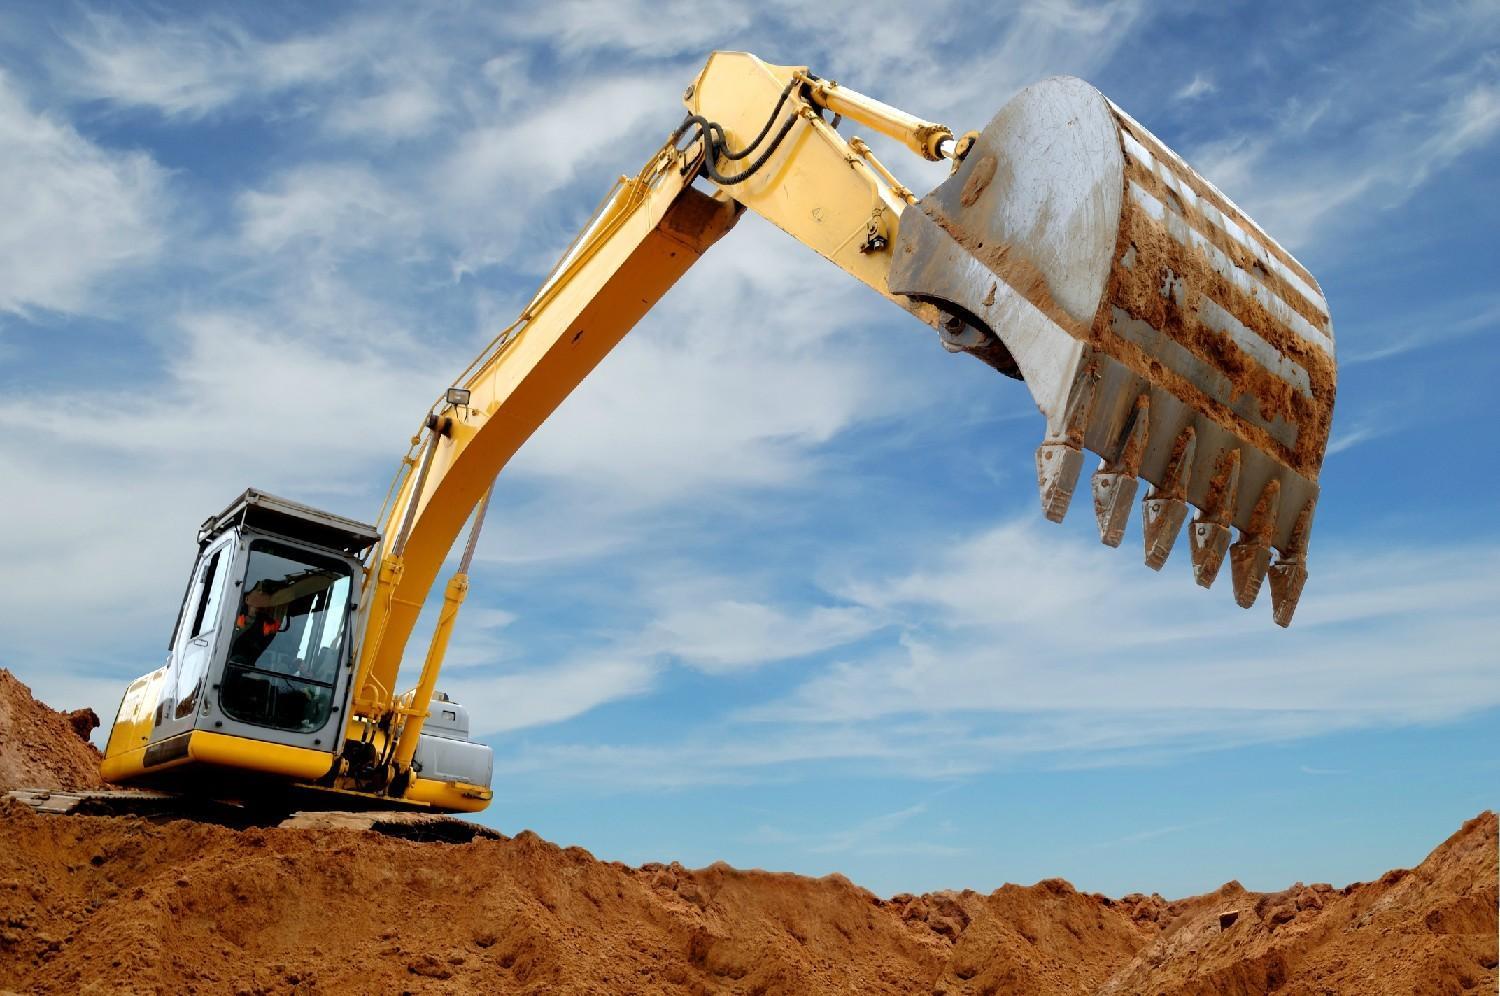 17-types-of-heavy-equipment-commonly-used-in-construction